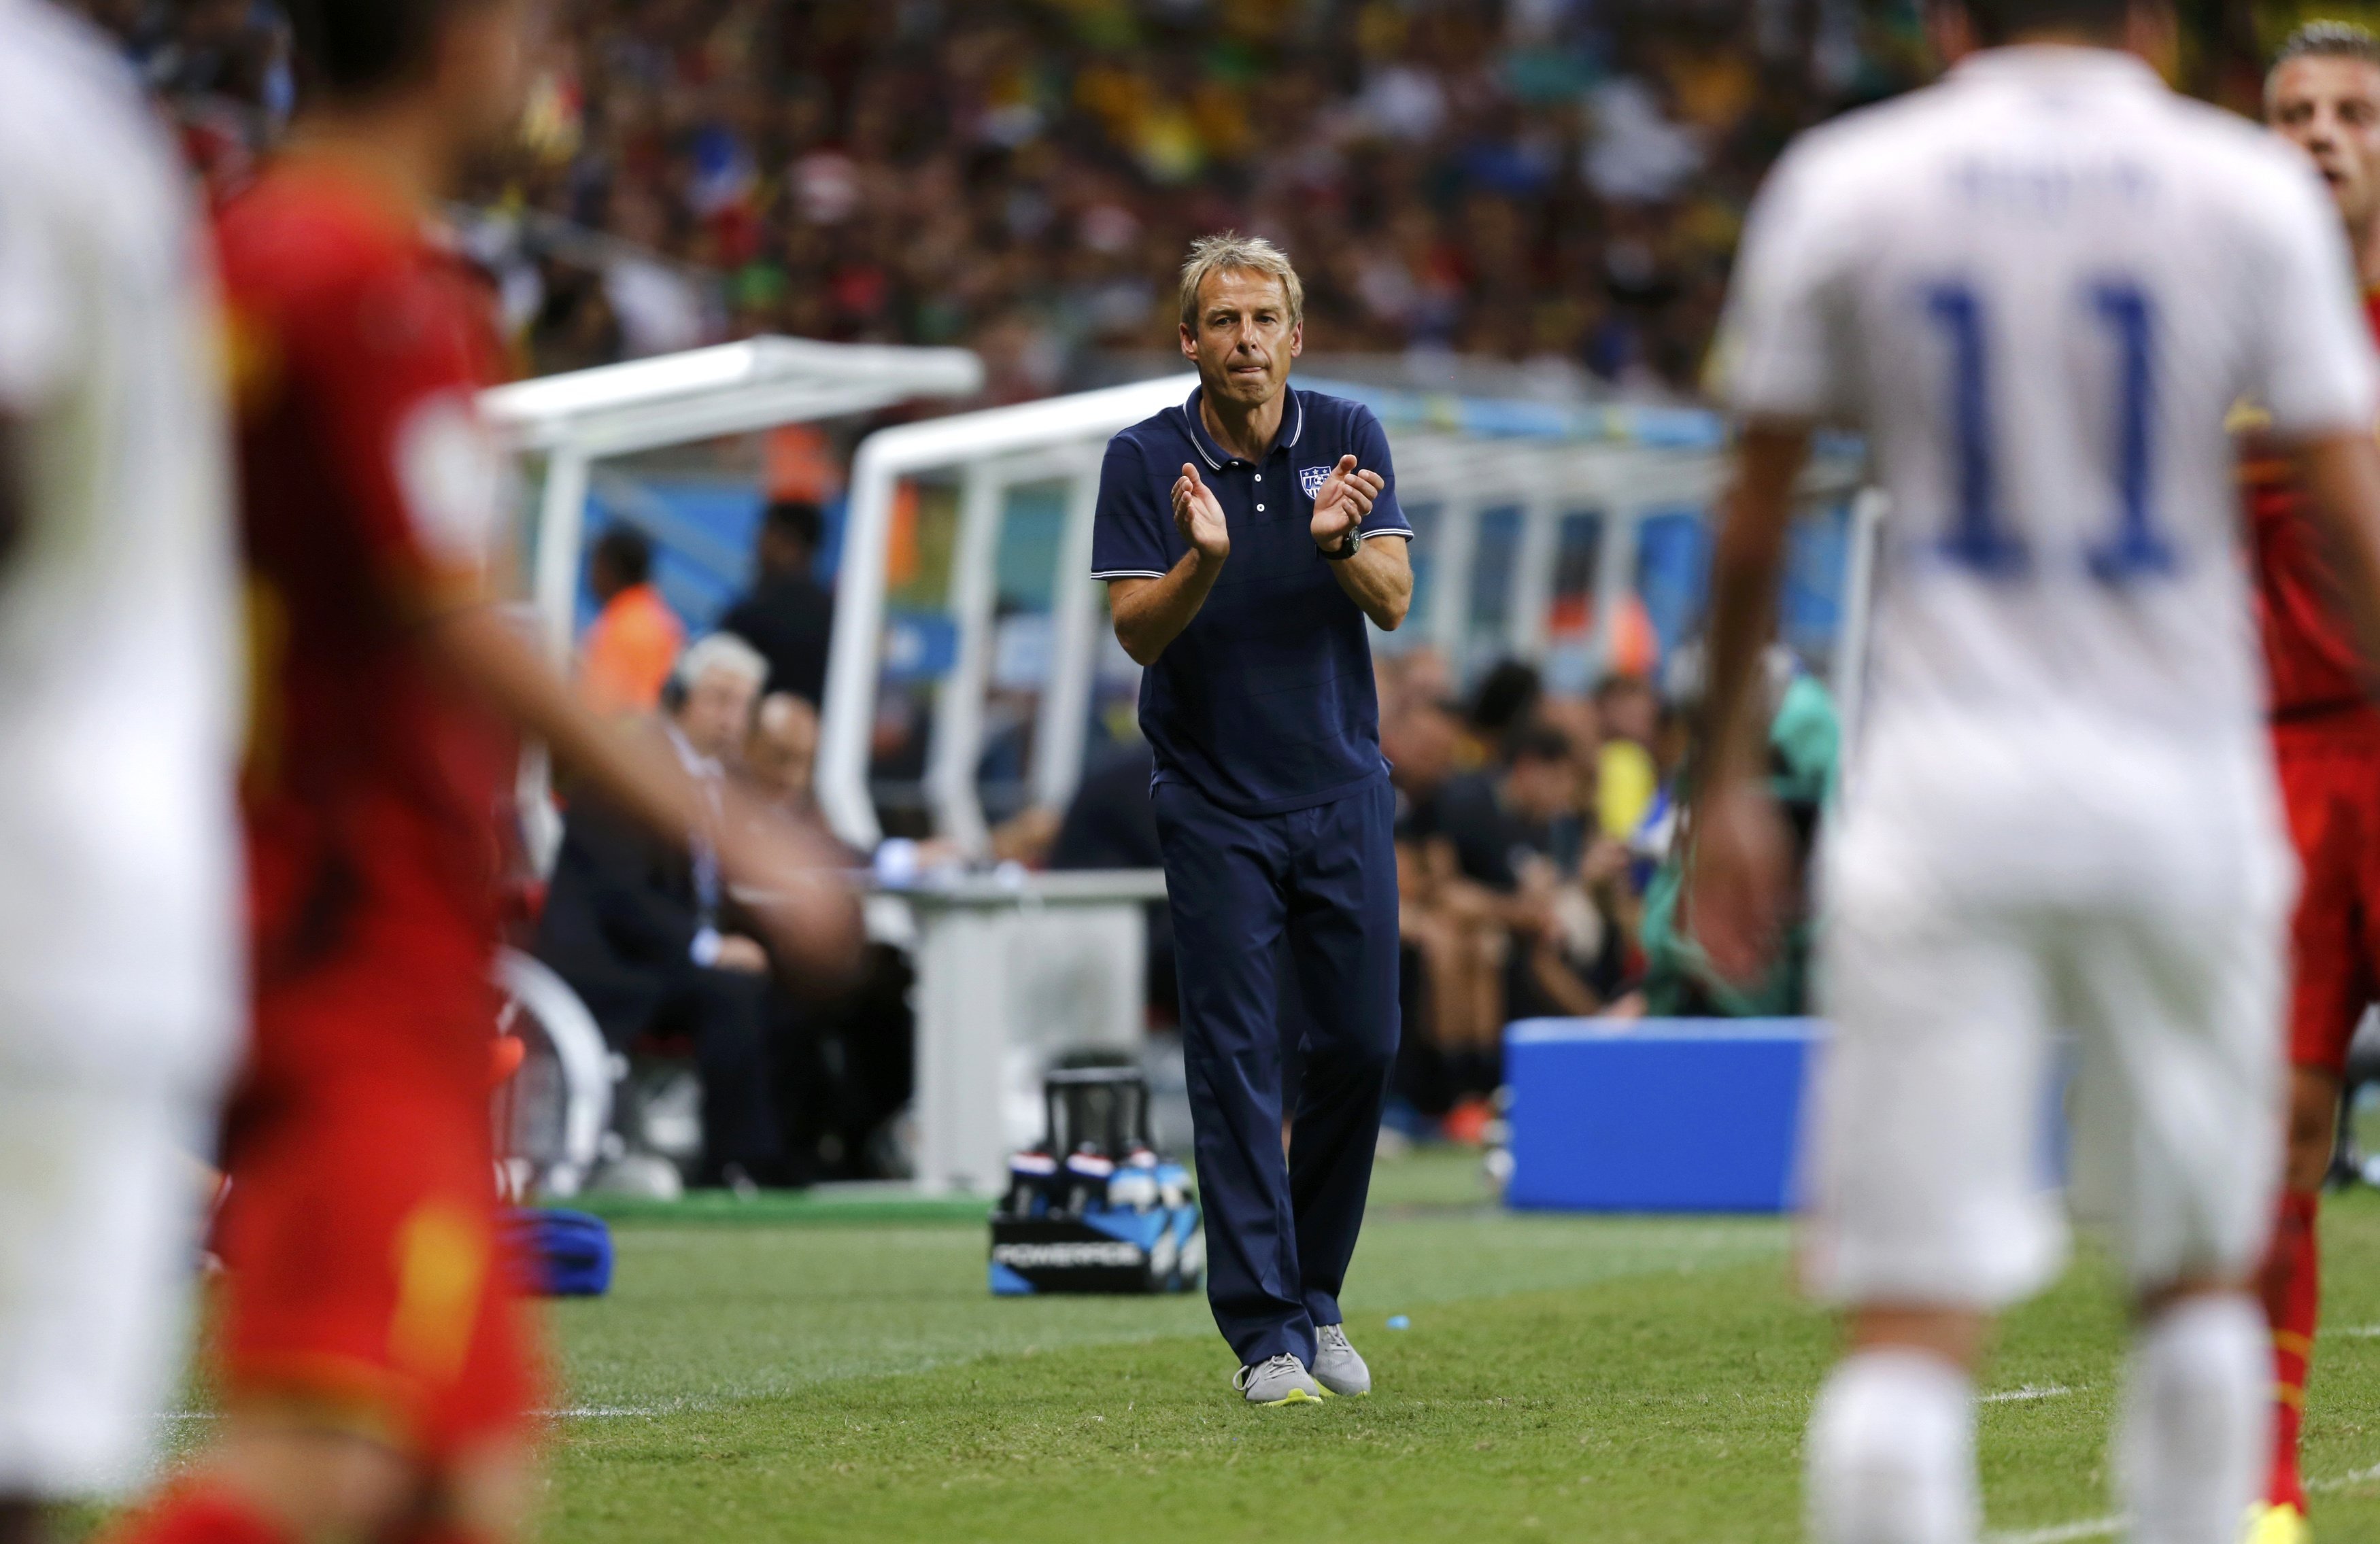 U.S. coach Juergen Klinsmann claps during the game between Belgium and the U.S. at the Fonte Nova arena in Salvador, Brazil on July 1, 2014.